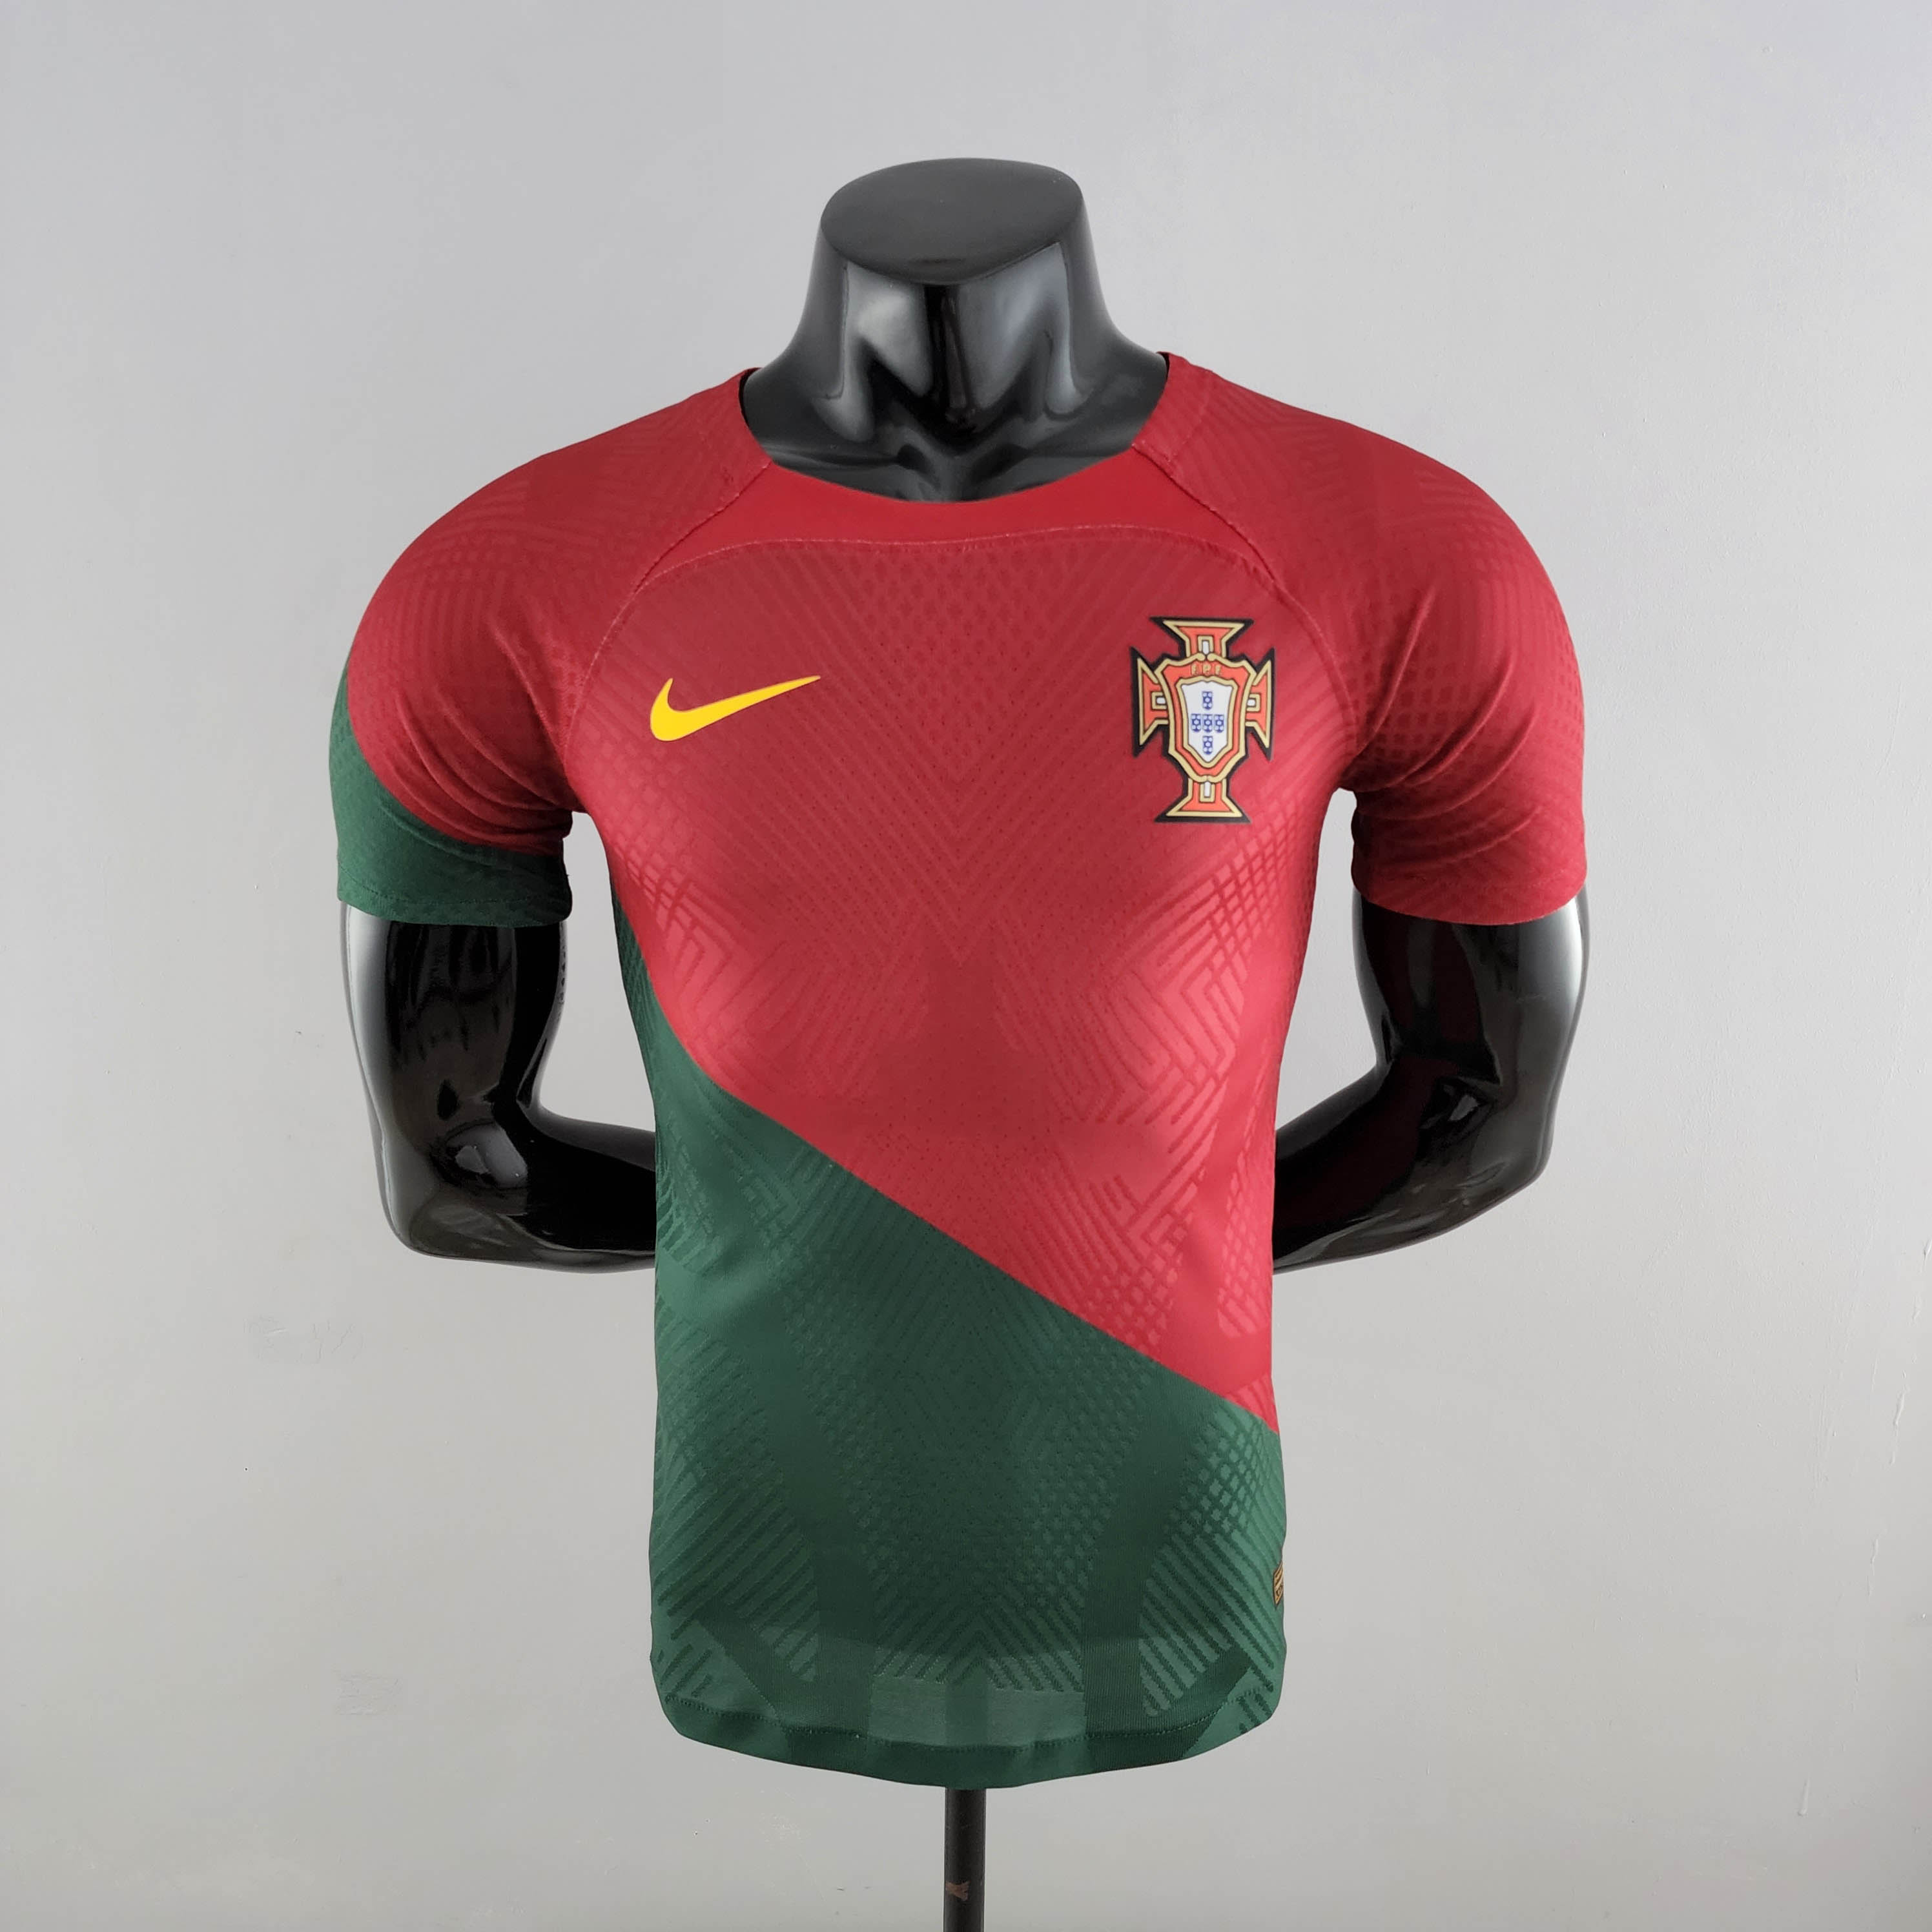 2022 FIFA World Cup Player Version Portugal Home Football Shirt